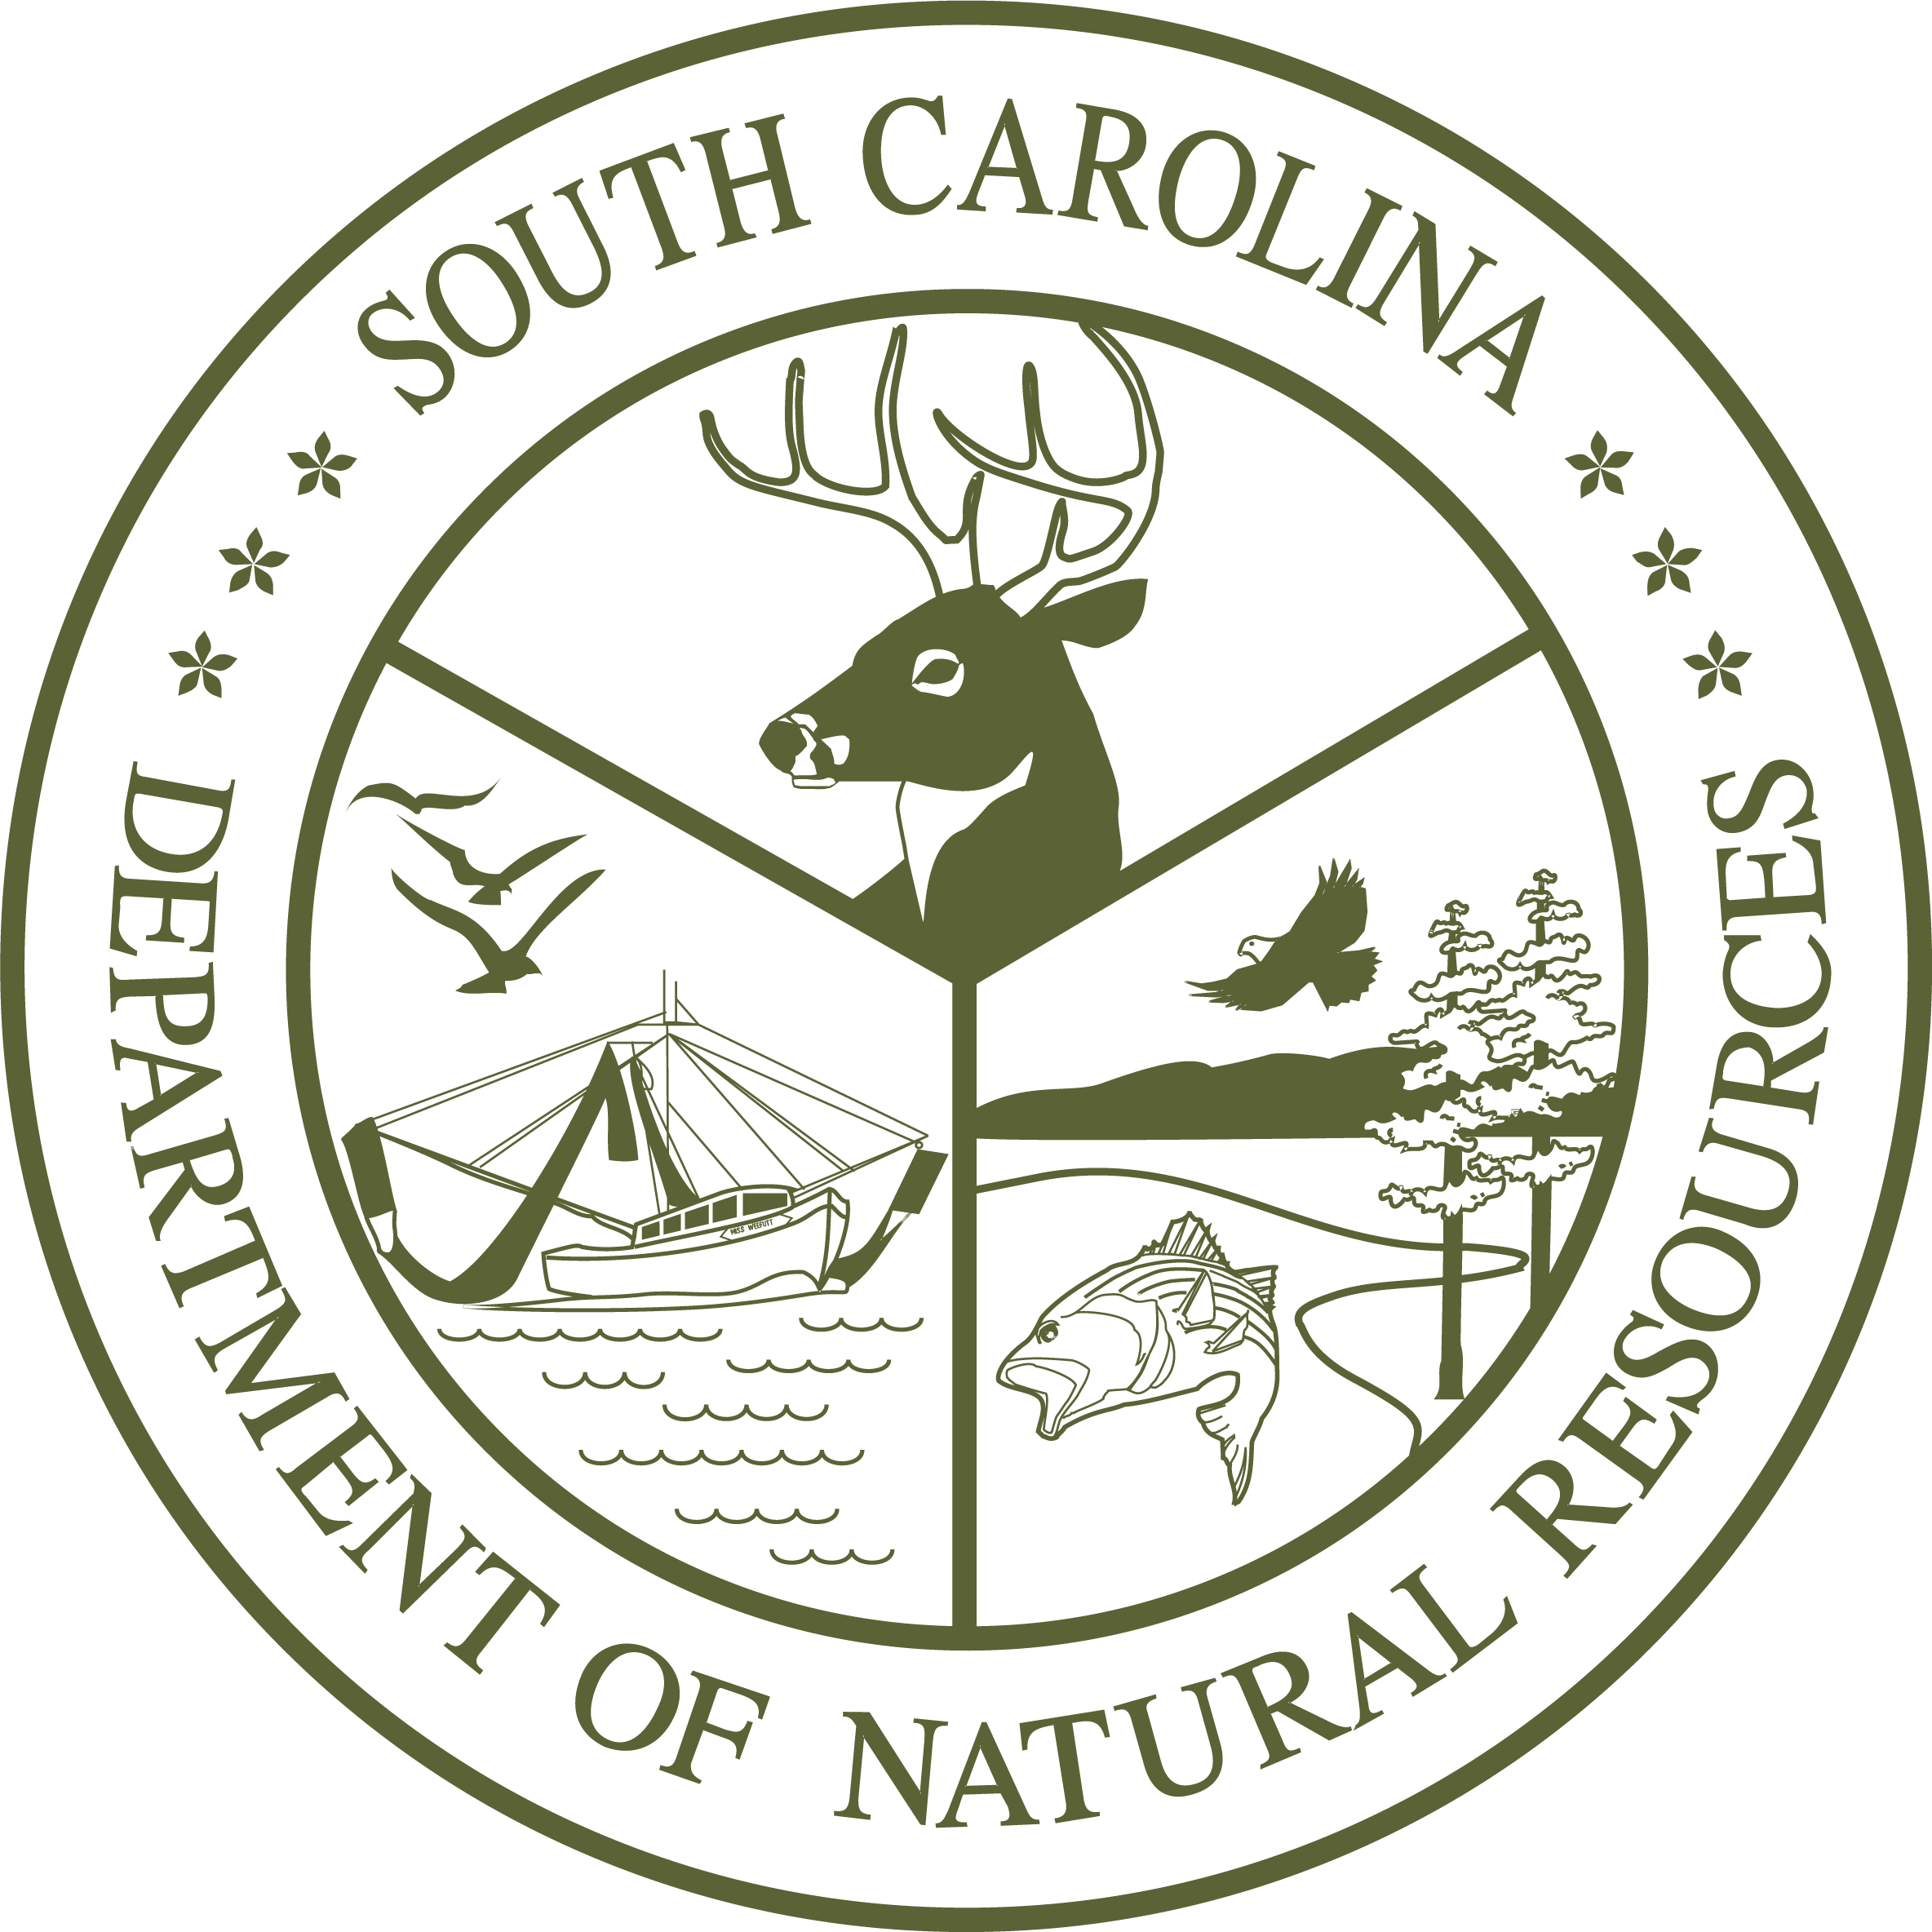 South Carolina Department of Natural Resources - SALTWATER ANGLERS